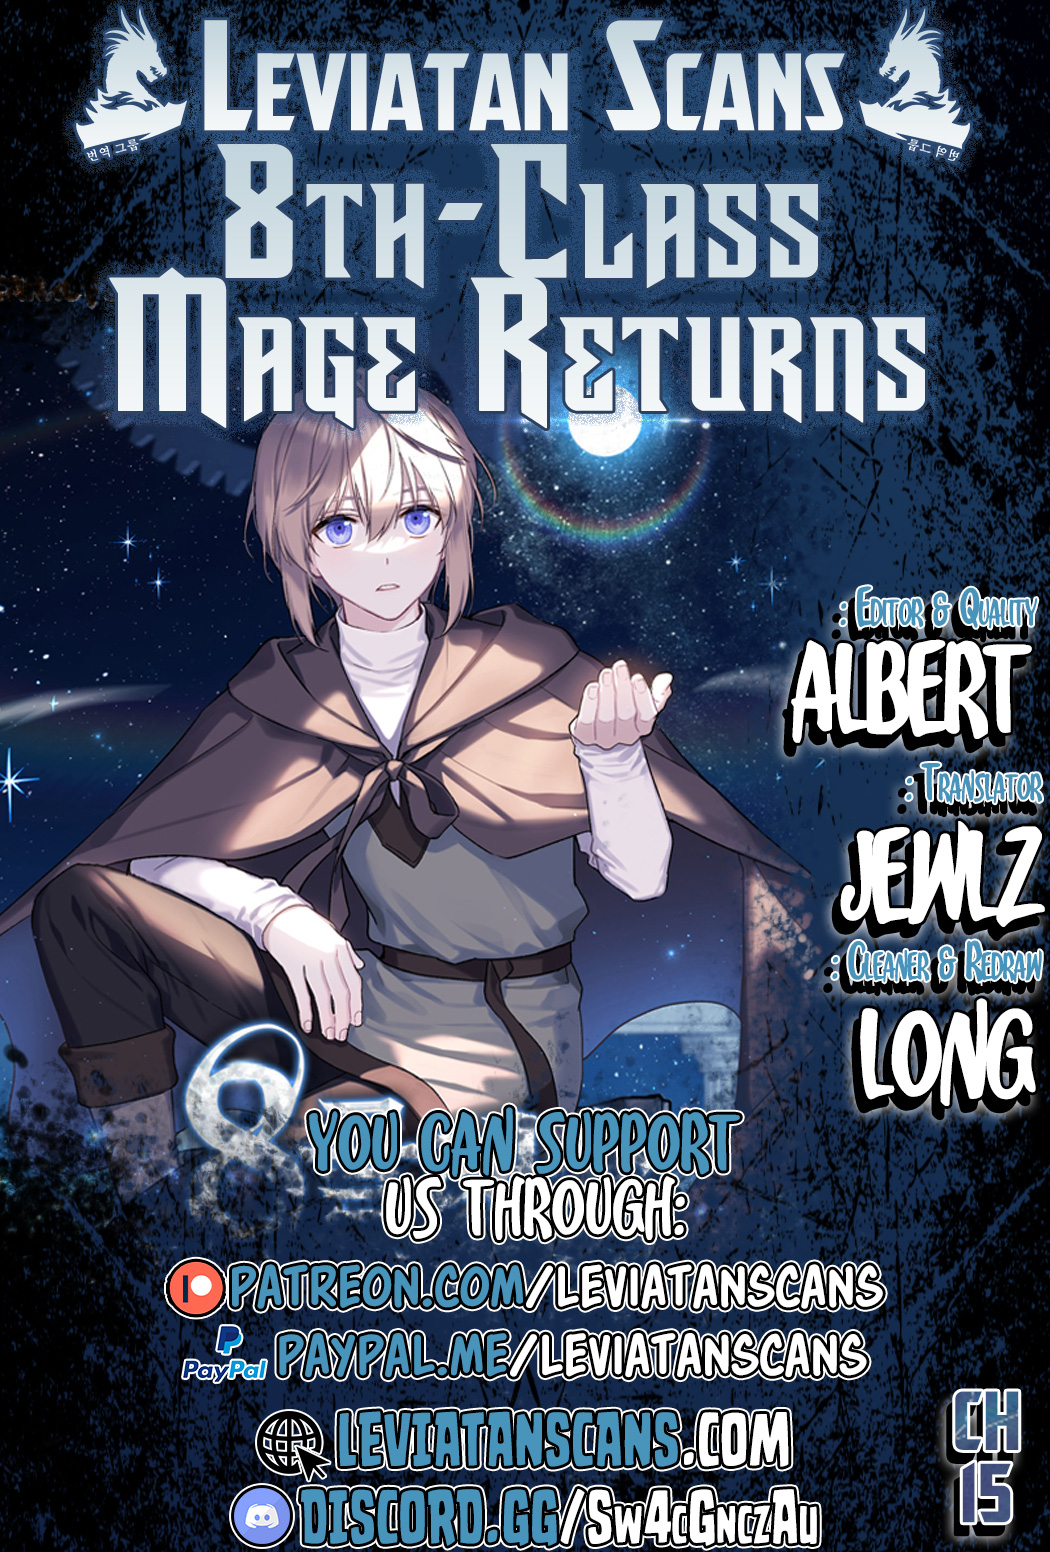 Return of the 8th Class Magician - Chapter 7134 - Image 1